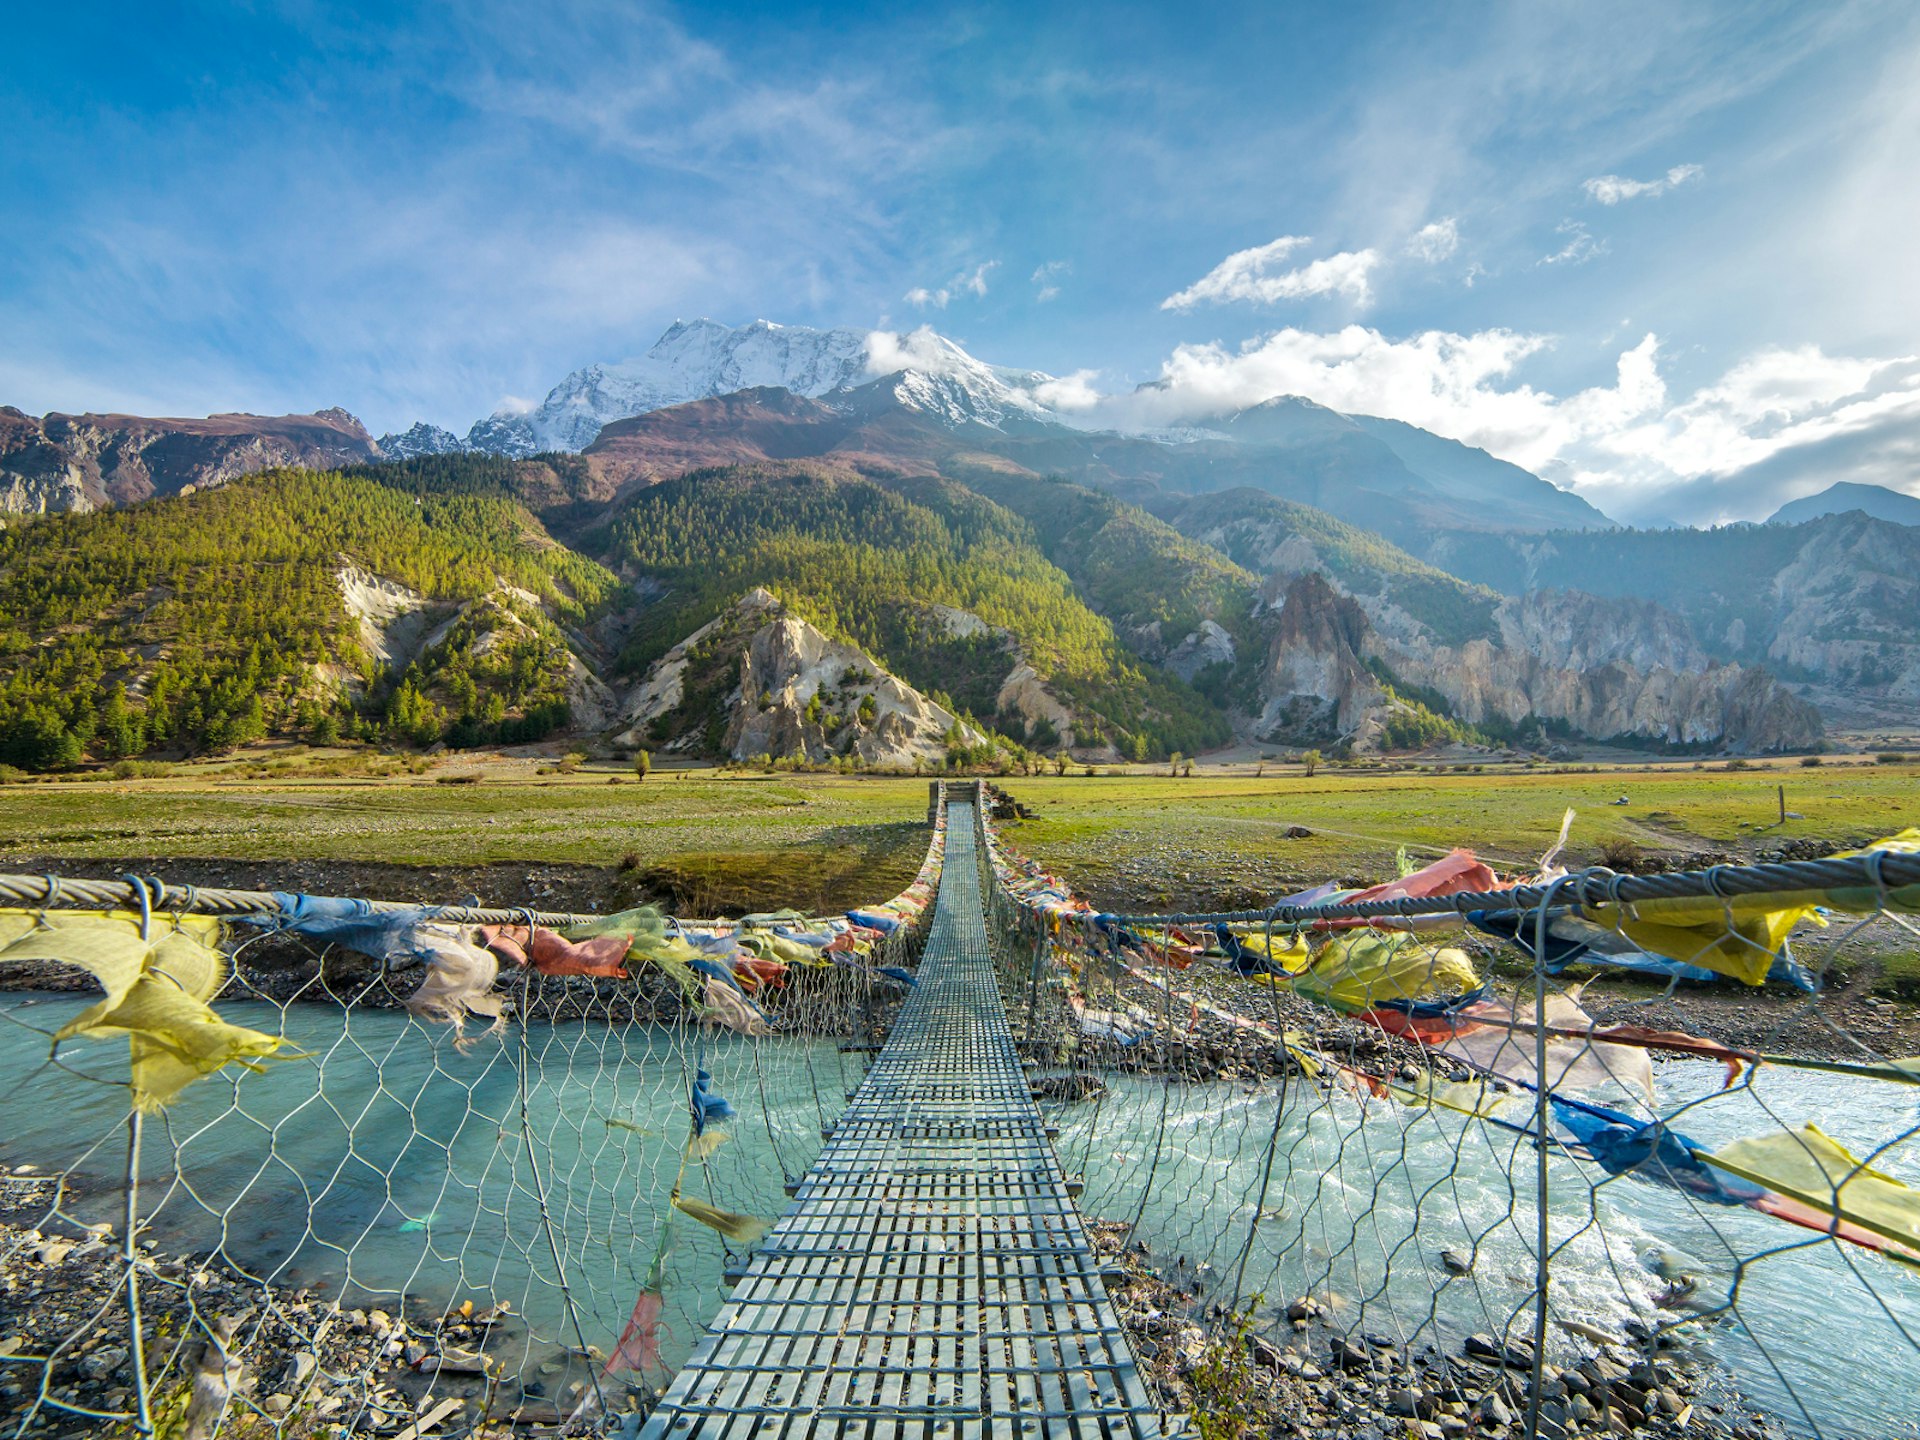 Suspension bridge, looking out to mountain scenery, with buddhist prayer flags on the Annapurna circuit trek in Nepal